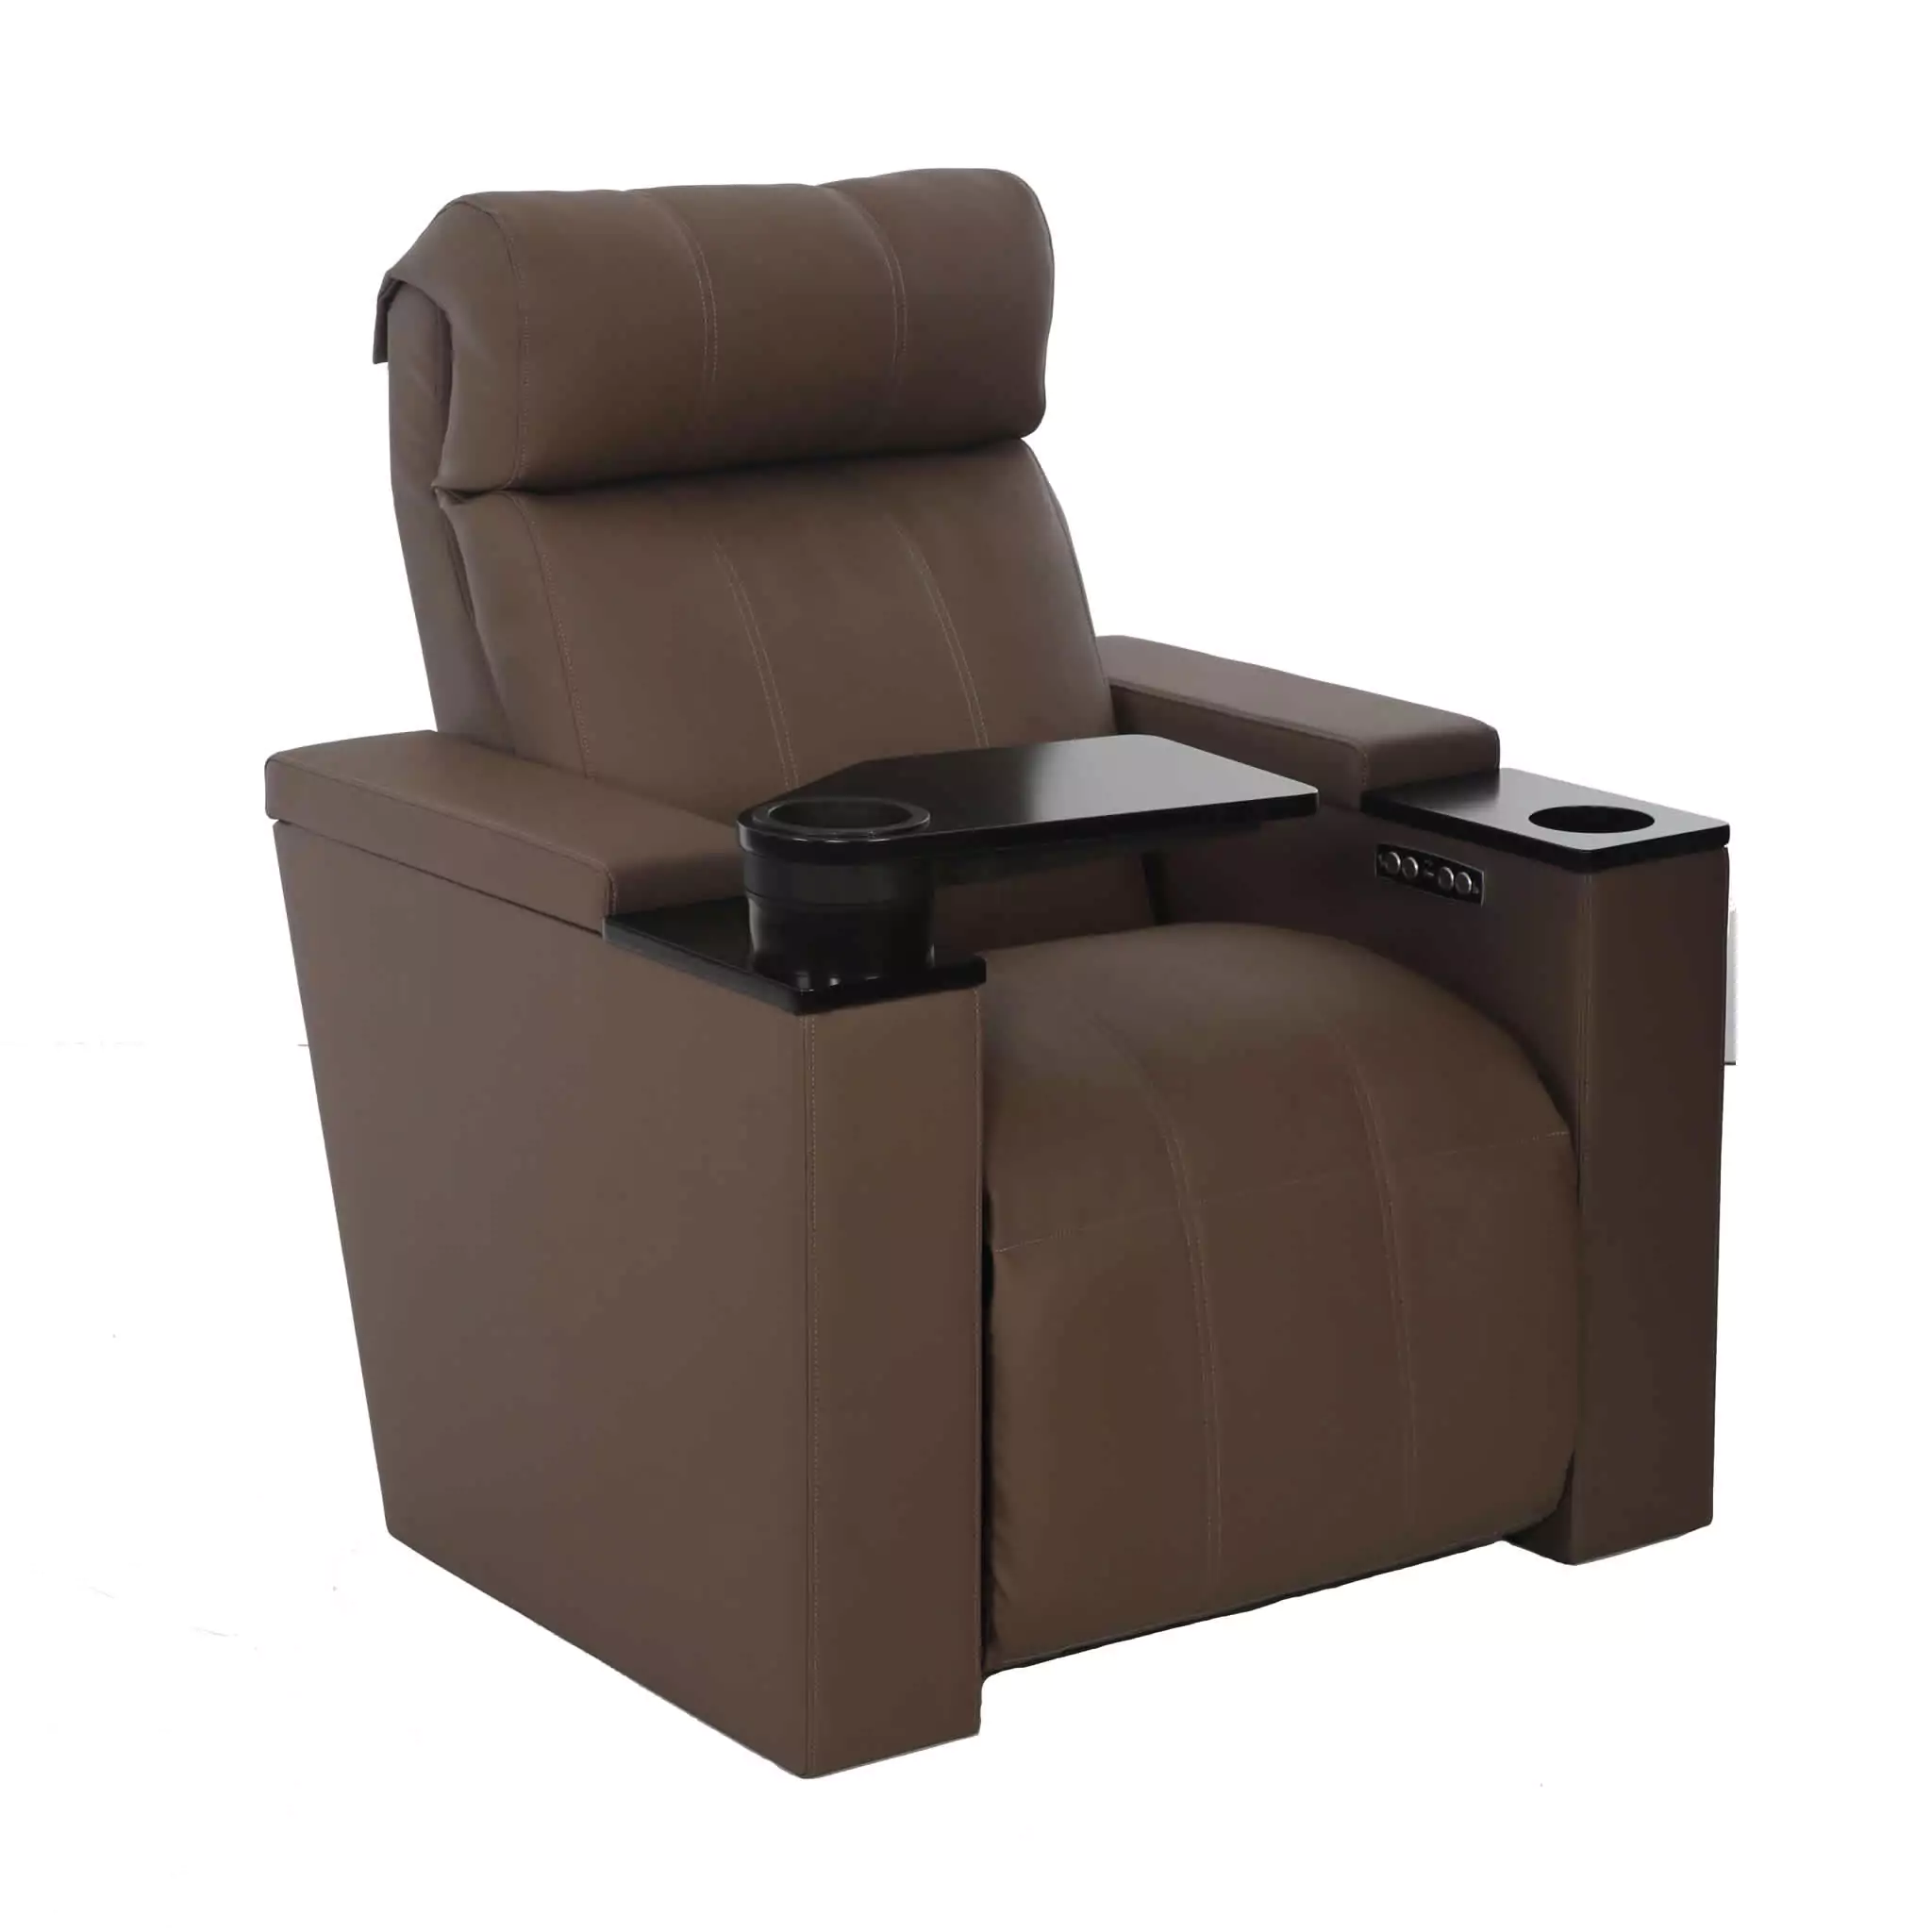 Simko Seating Products Recliner Cinema Seat Monstone 02